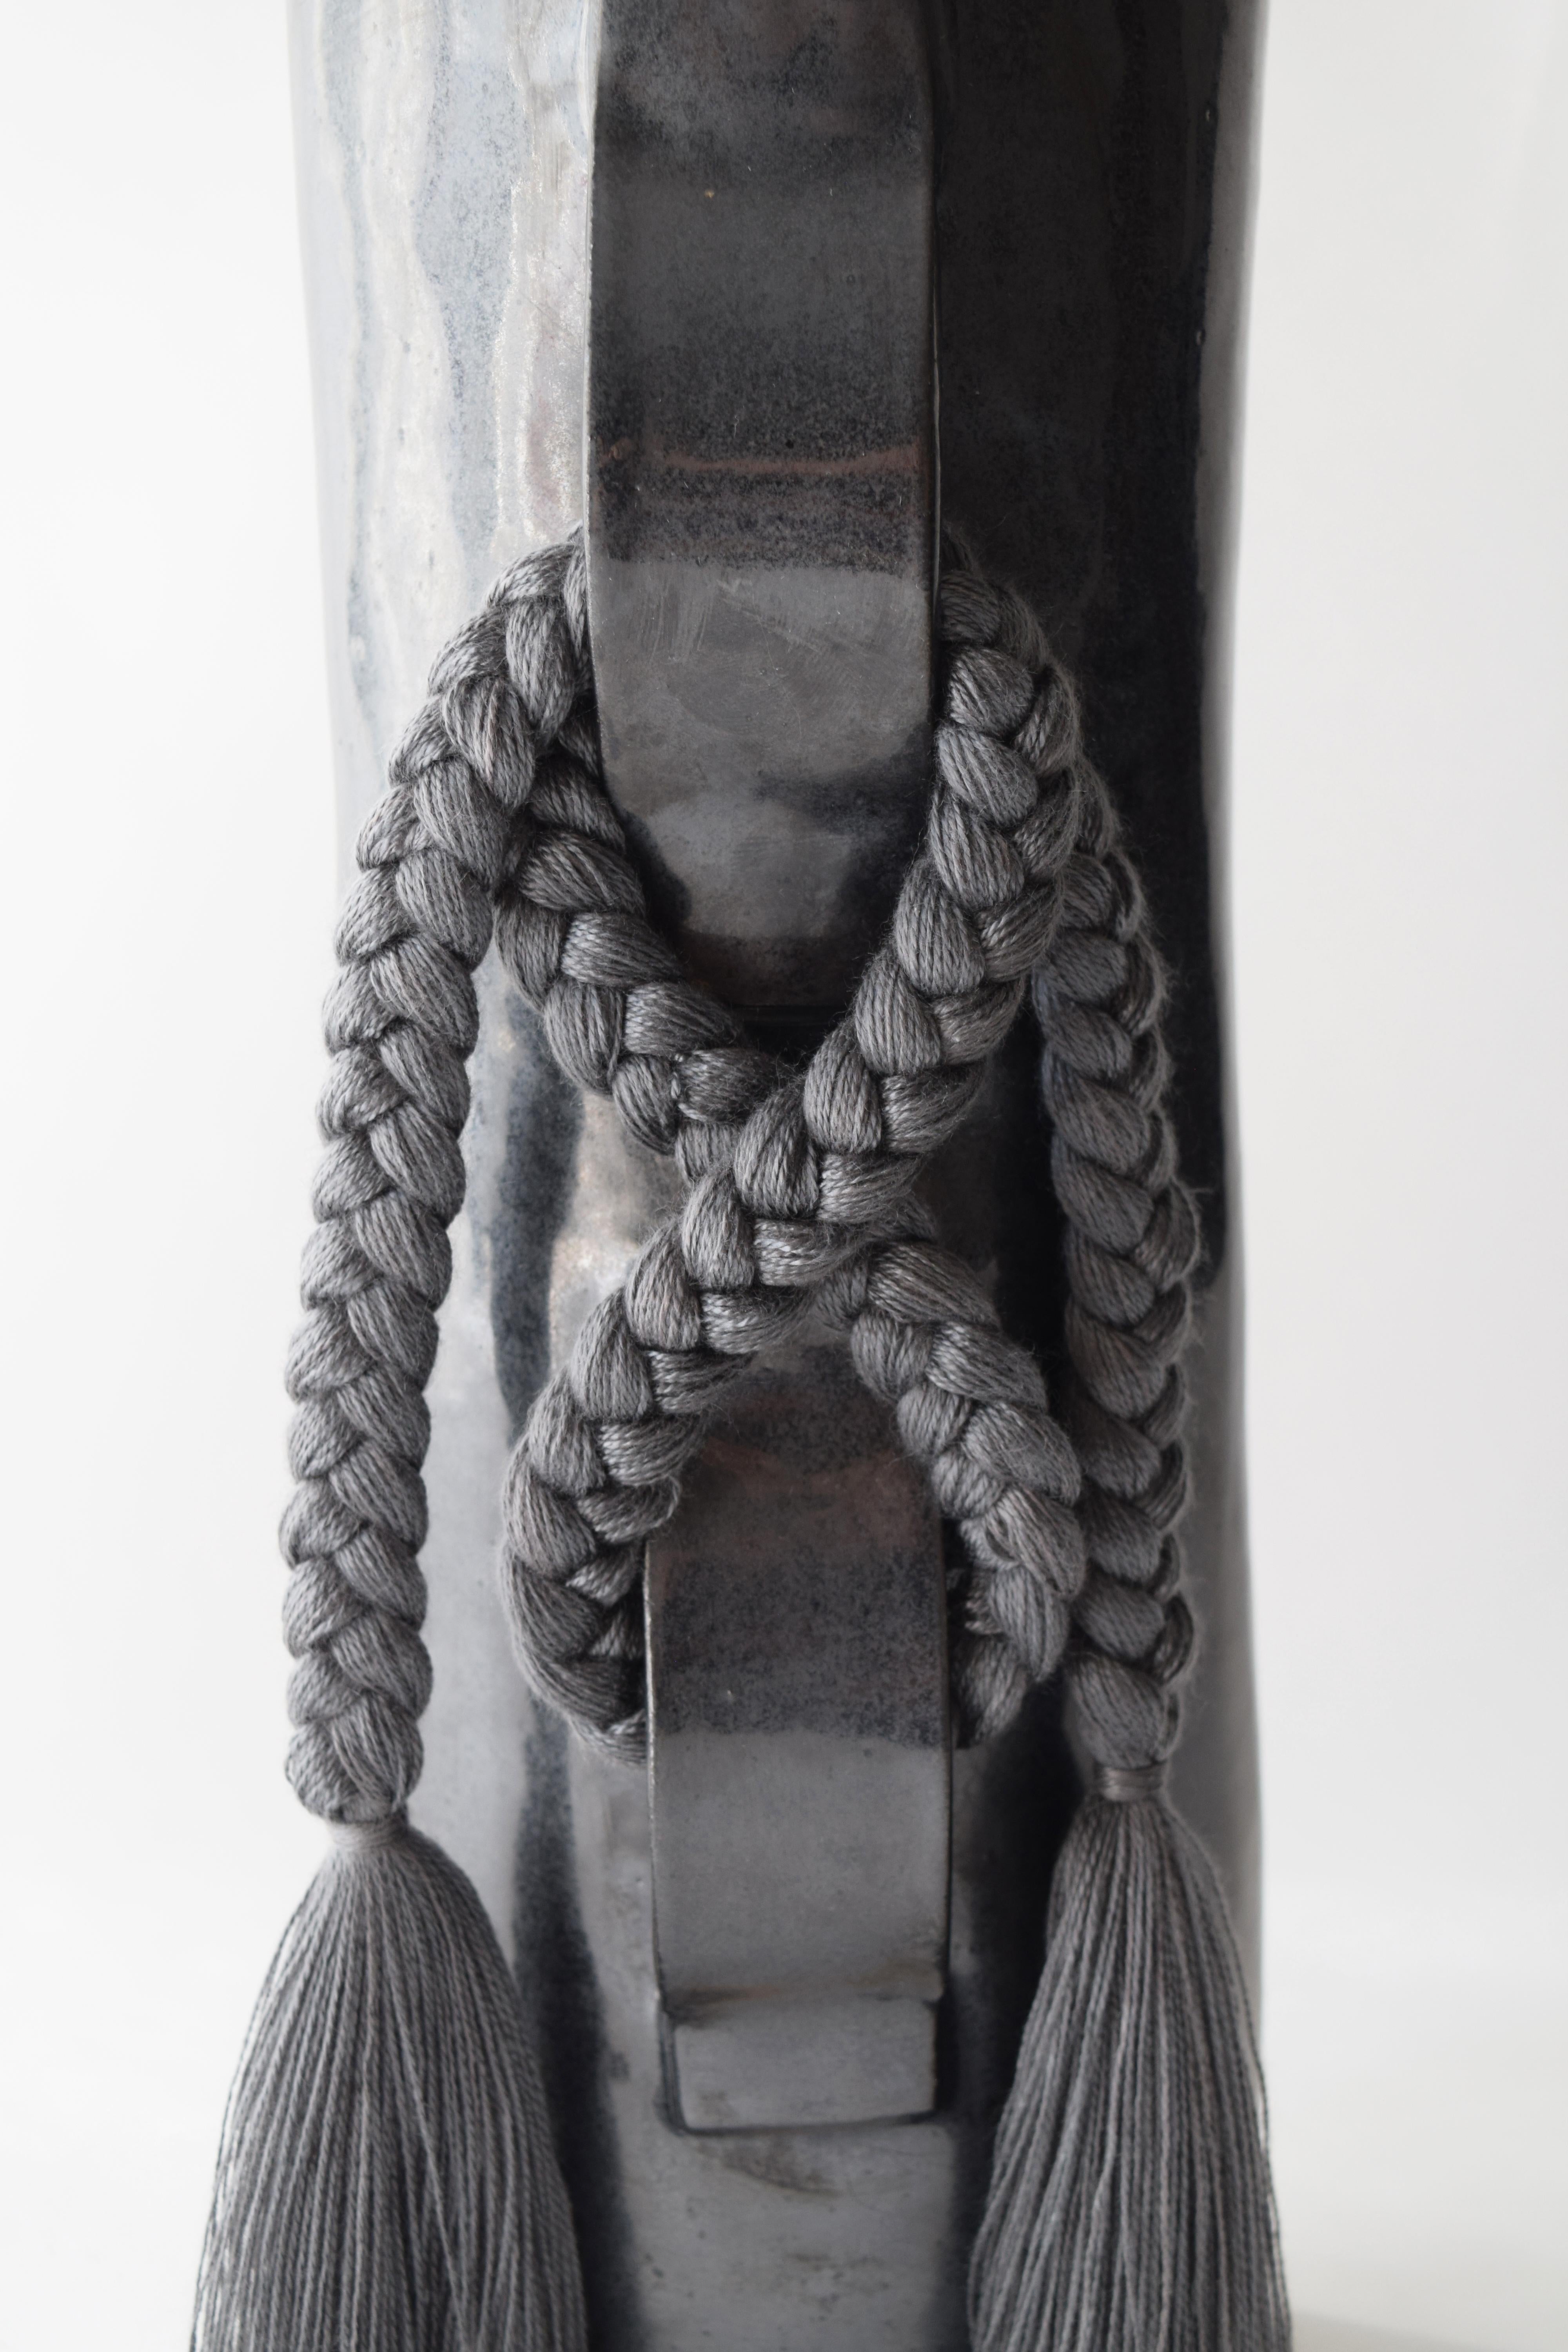 Vase #696 by Karen Gayle Tinney

Featuring a large gestural knot, this vase takes inspiration from the braided details of Karen’s one of a kind wall sculptures.

Hand formed stoneware with black glaze. Charcoal tencel braided details (braid is sewn